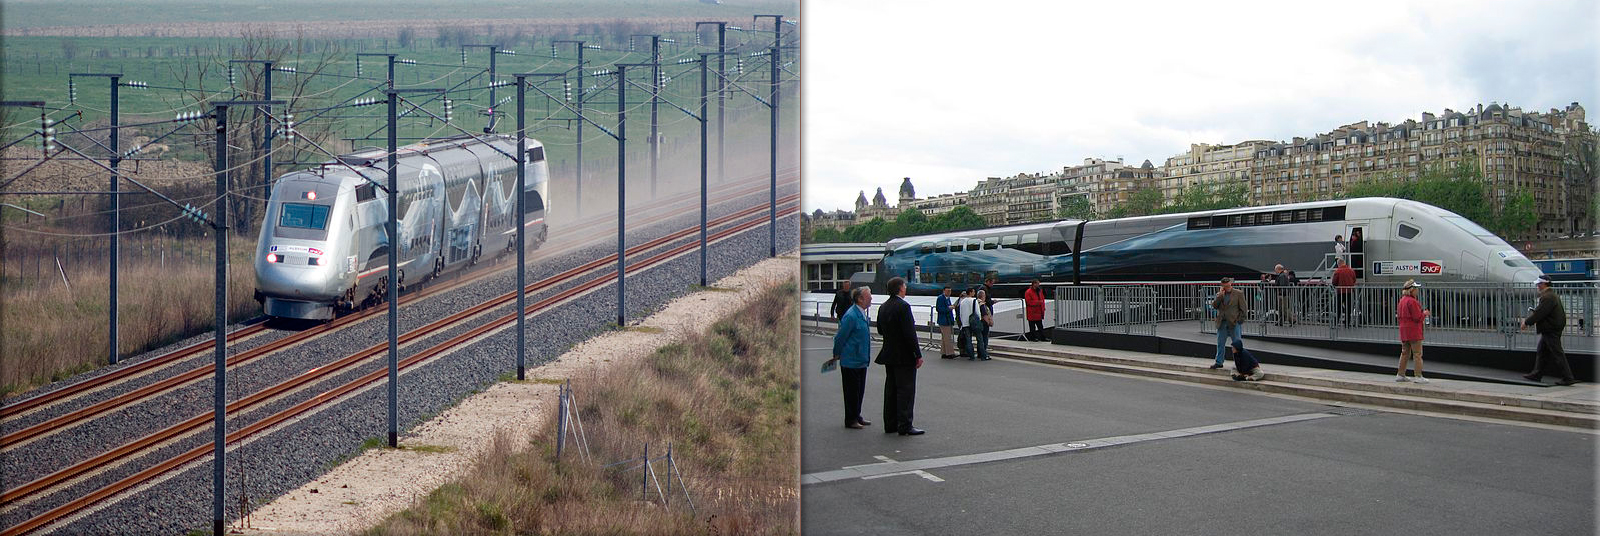 TGV 4402 (operation V150) reaching 574 km/h on 3 April 2007 near Le Chemin, France. ● Part of TGV trainset 4402 displayed near the Eiffel Tower after the record